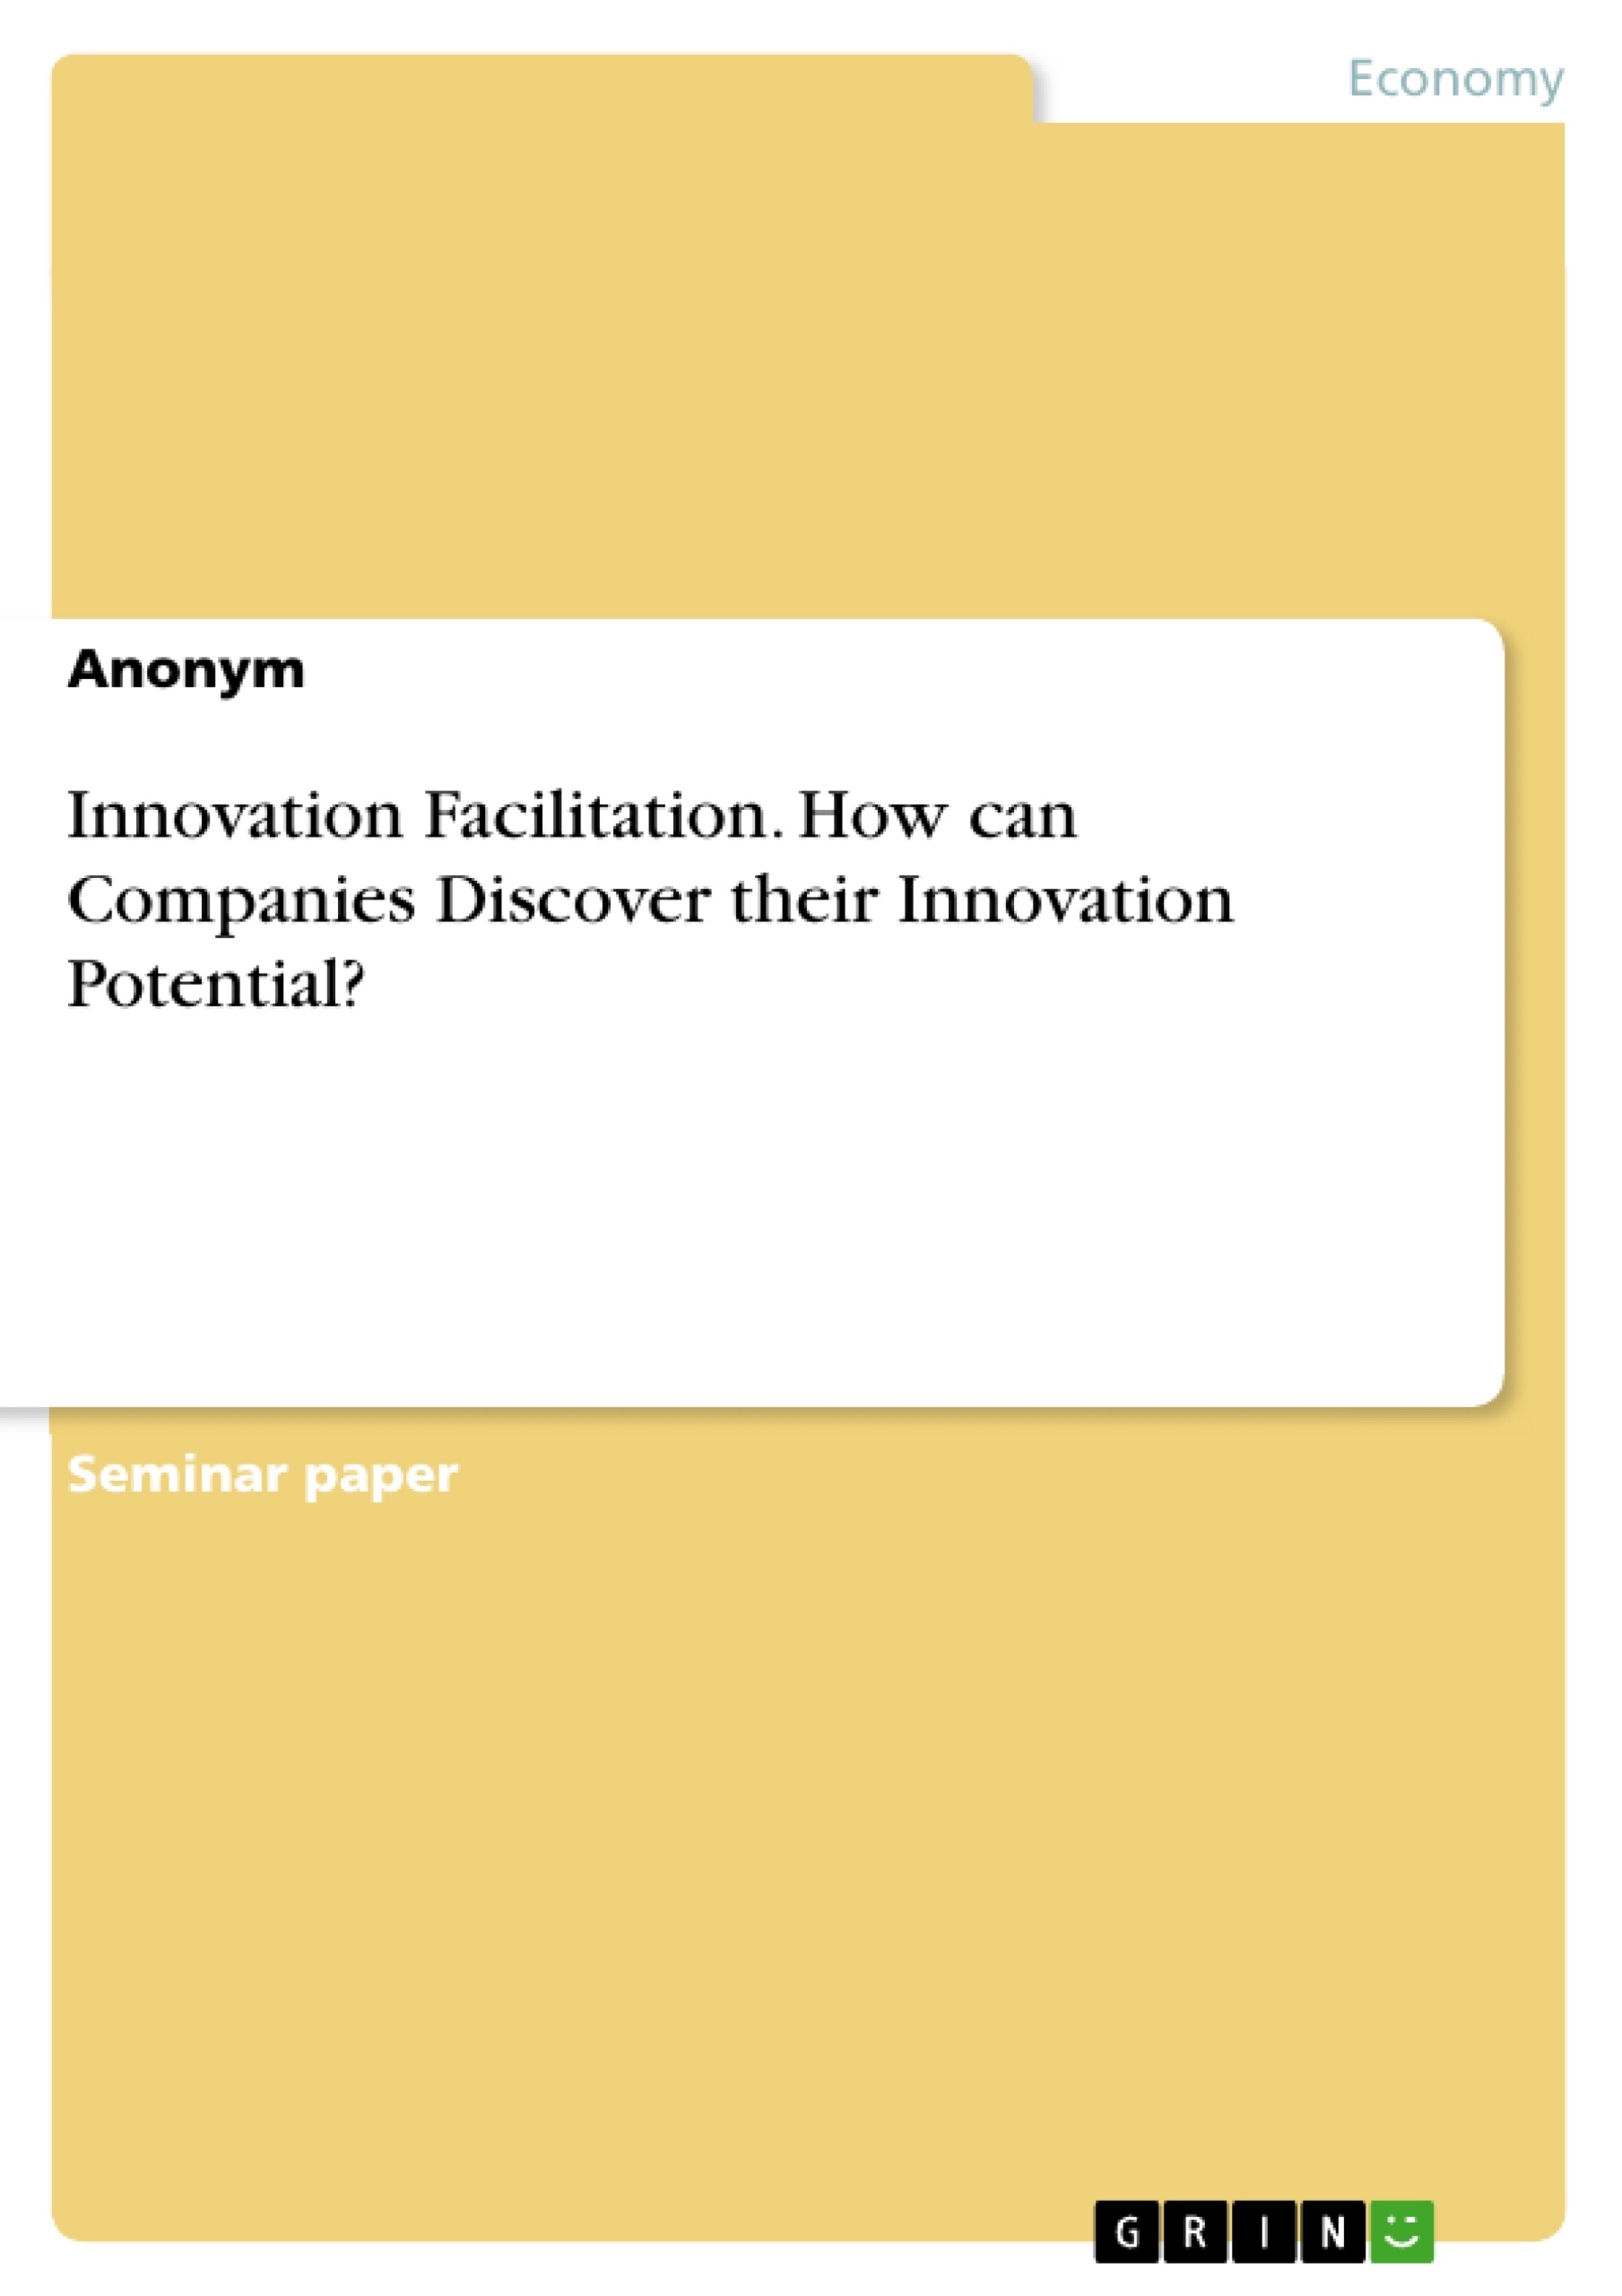 Title: Innovation Facilitation. How can Companies Discover their Innovation Potential?